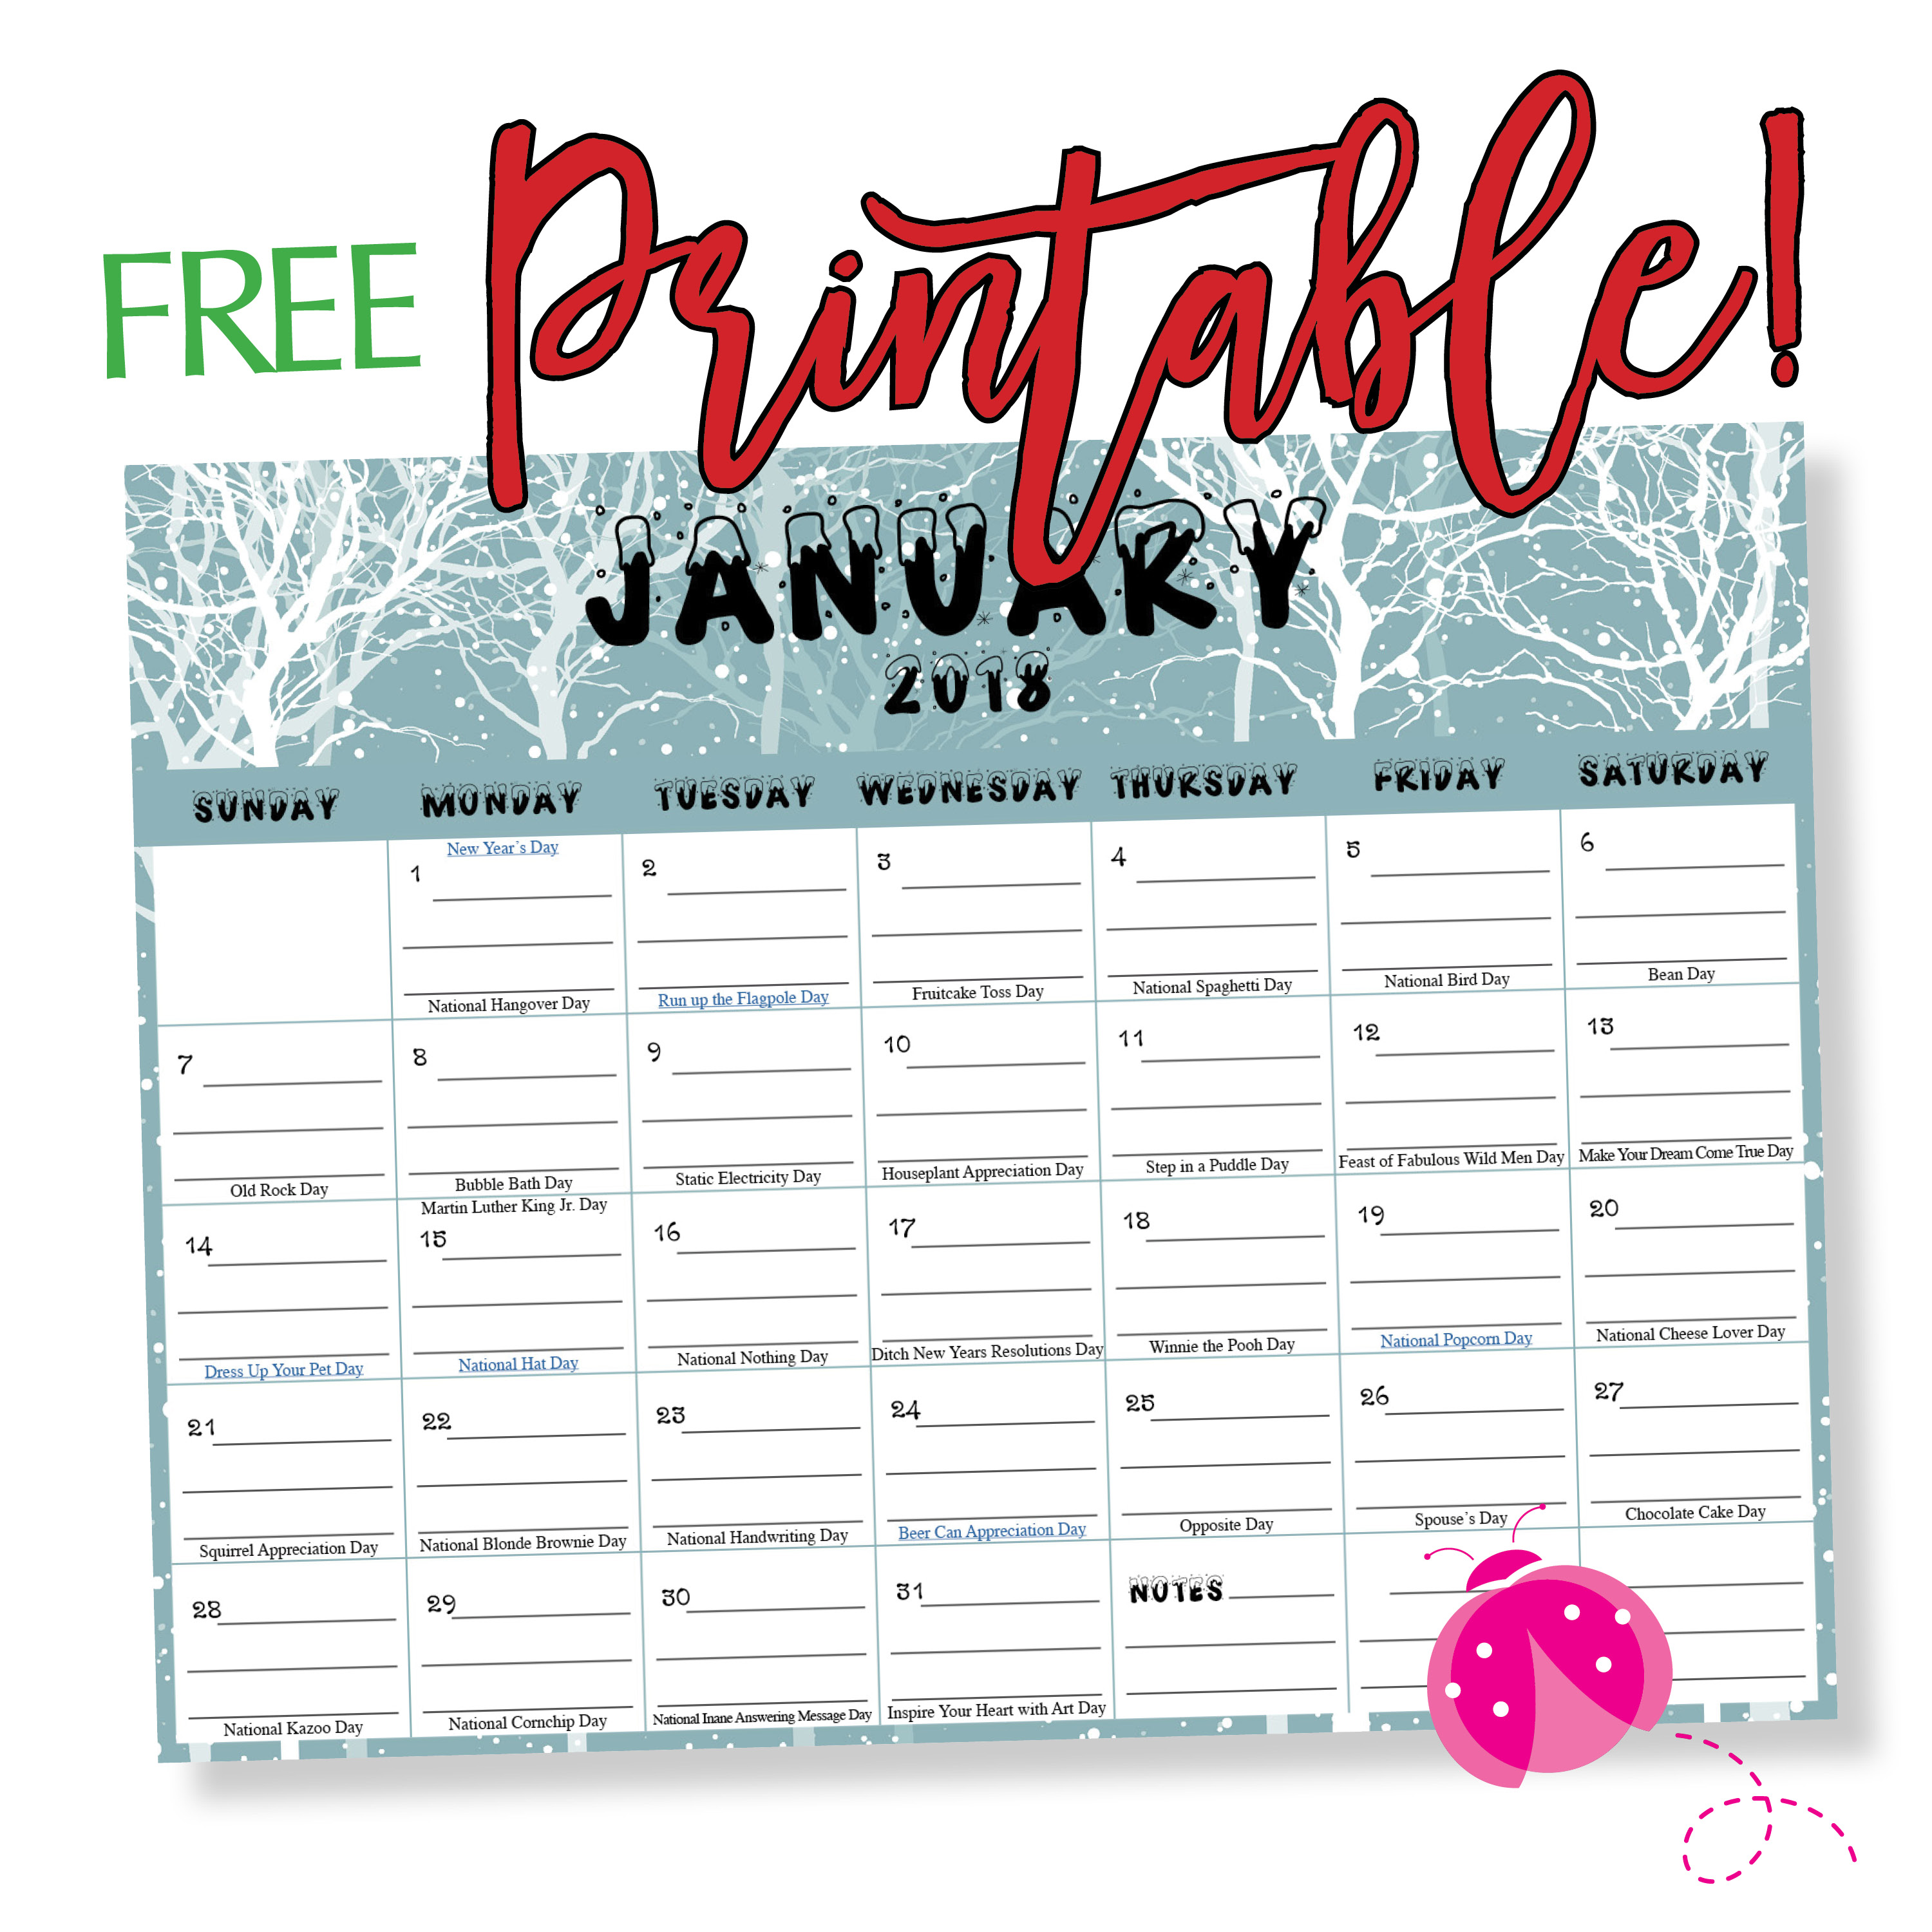 Free-Printable-Calendar-For-January-2018-with-holidays-featured-image-2